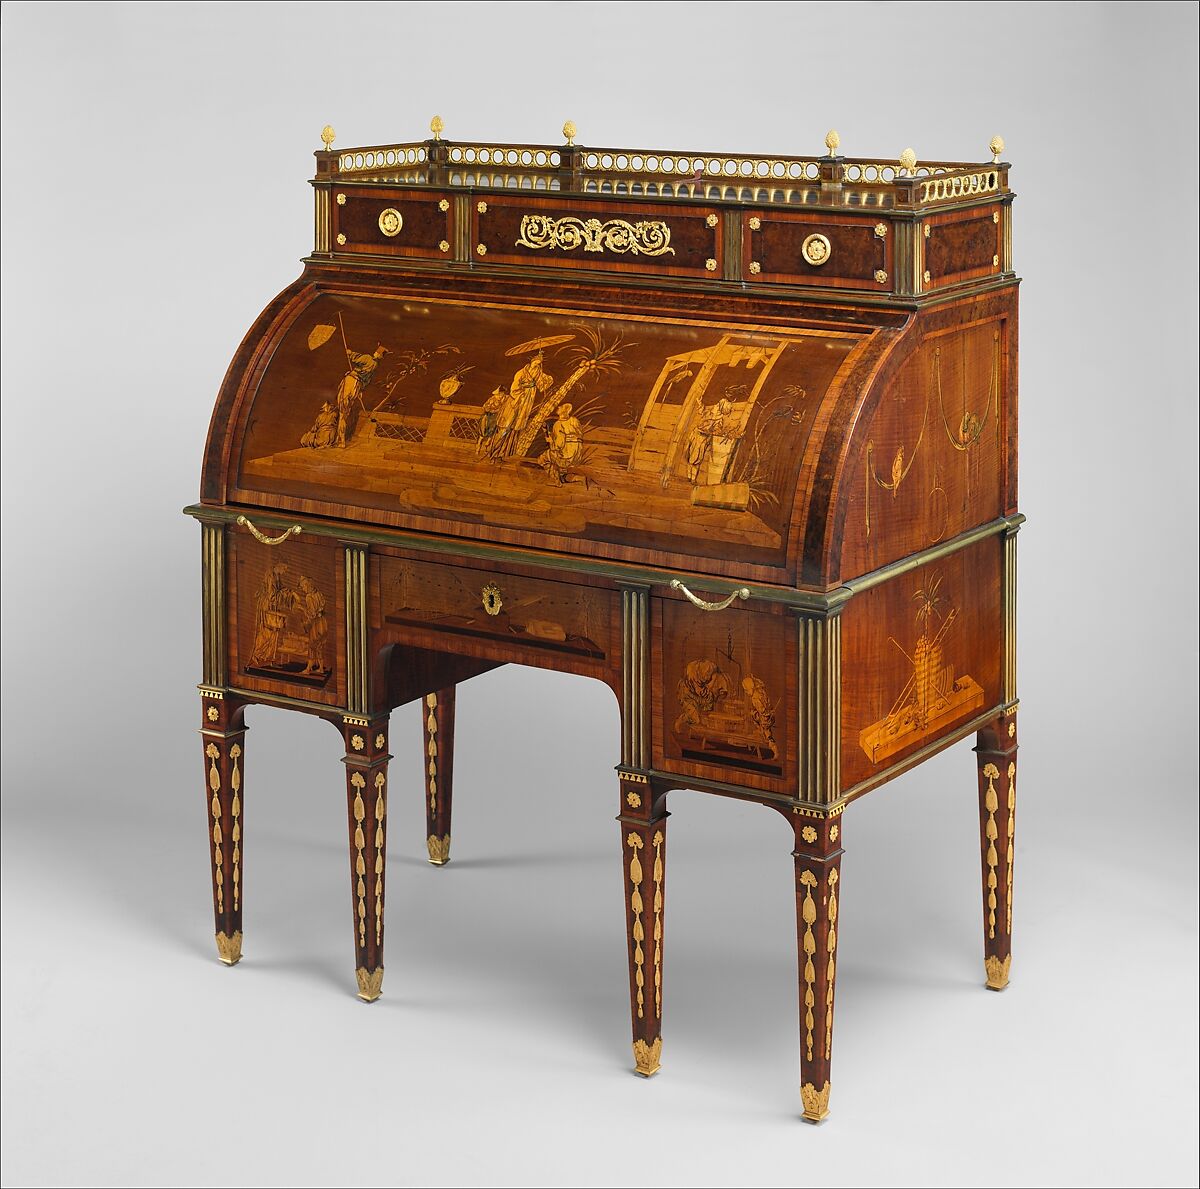 Rolltop desk, David Roentgen (German, Herrnhaag 1743–1807 Wiesbaden, master 1780), Oak, cherry, pine, mahogany, veneered with maple, burl woods, holly, hornbeam (all partially stained), tulipwood, mahogany, and other woods; mother-of-pearl; partially gilded and tooled leather; gilt bronze, iron, steel, brass, partially gold-lacquered brass, German, Neuwied am Rhein 